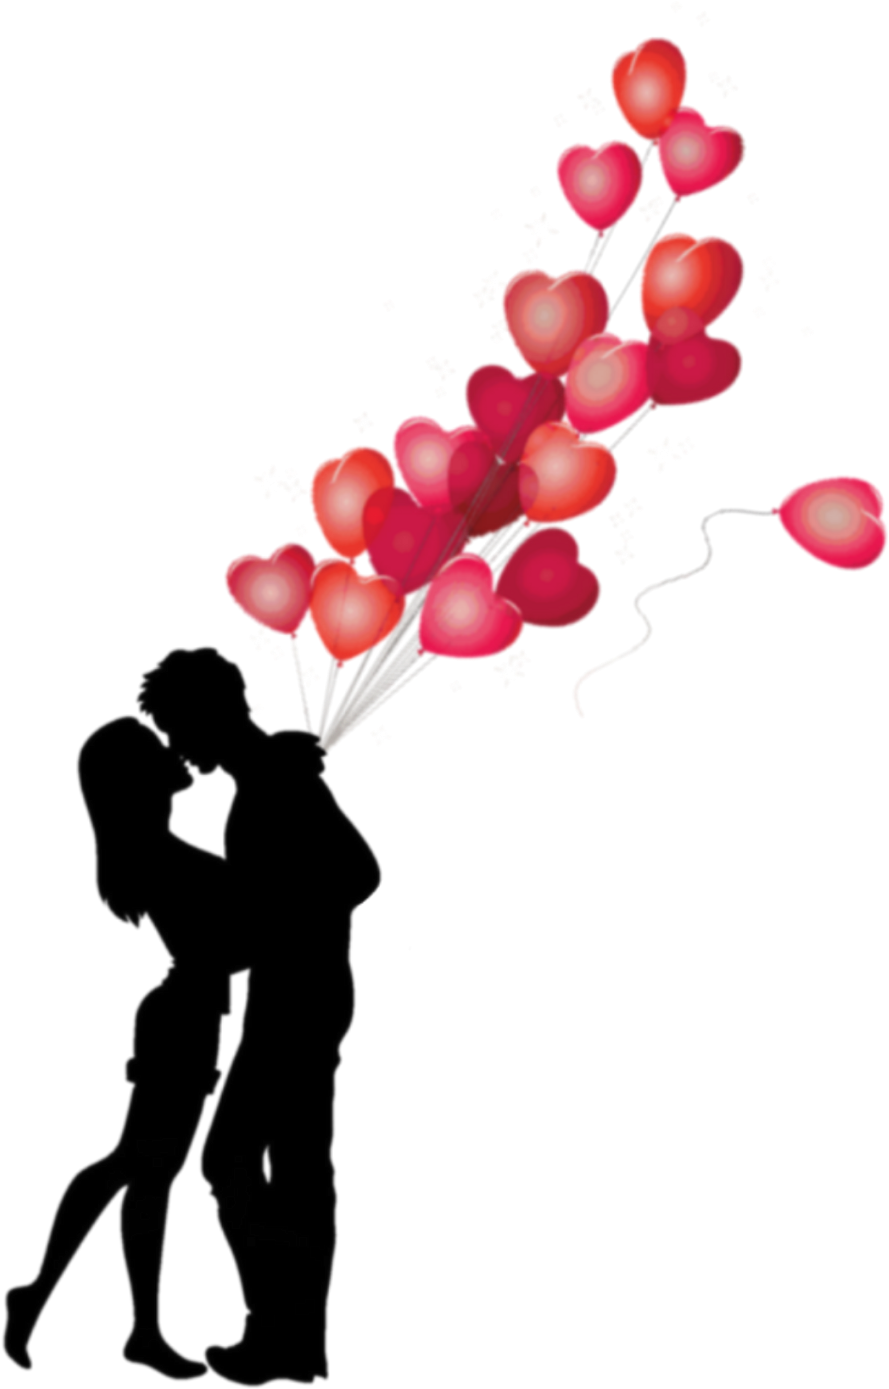 Romantic Silhouette Couple With Heart Balloons PNG